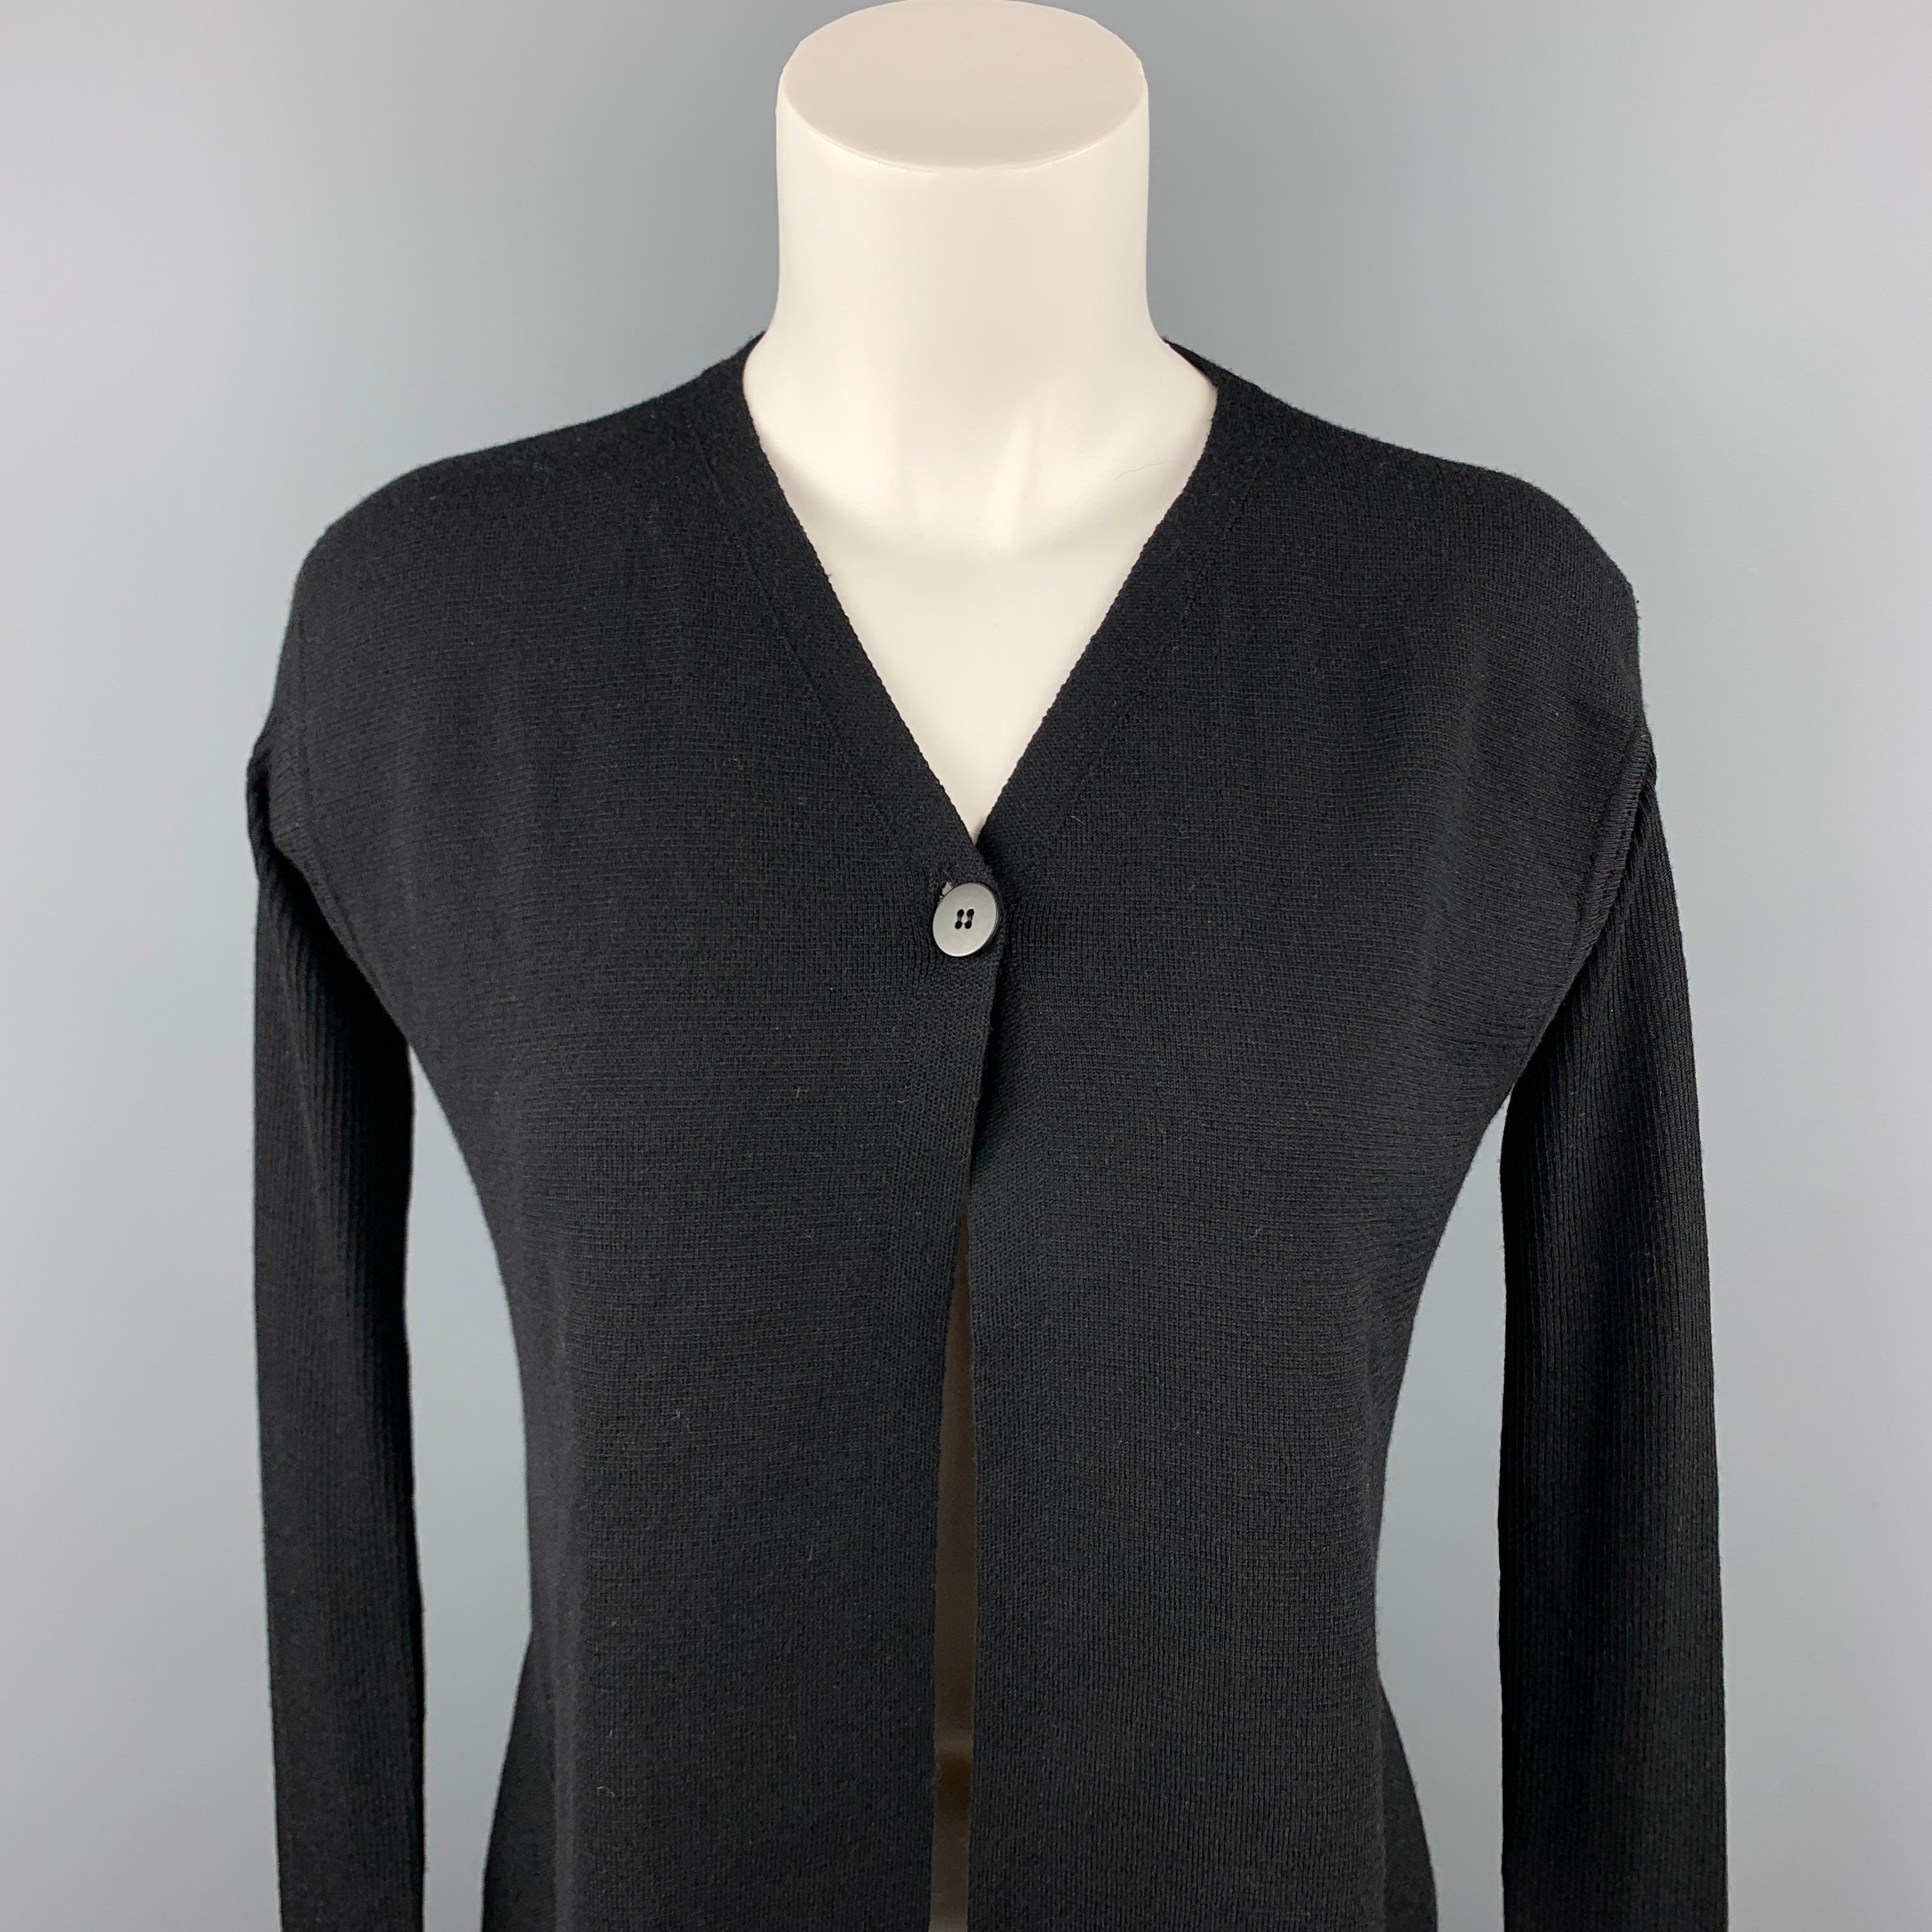 RICK OWENS VICIOUS S/S 14 cardigan comes in a black knitted virgin wool featuring an asymmetrical and a single button closure. Made in Italy.

Very Good Pre-Owned Condition.
Marked: M

Measurements:

Shoulder: 17 in. 
Bust: 34 in. 
Sleeve: 32 in.